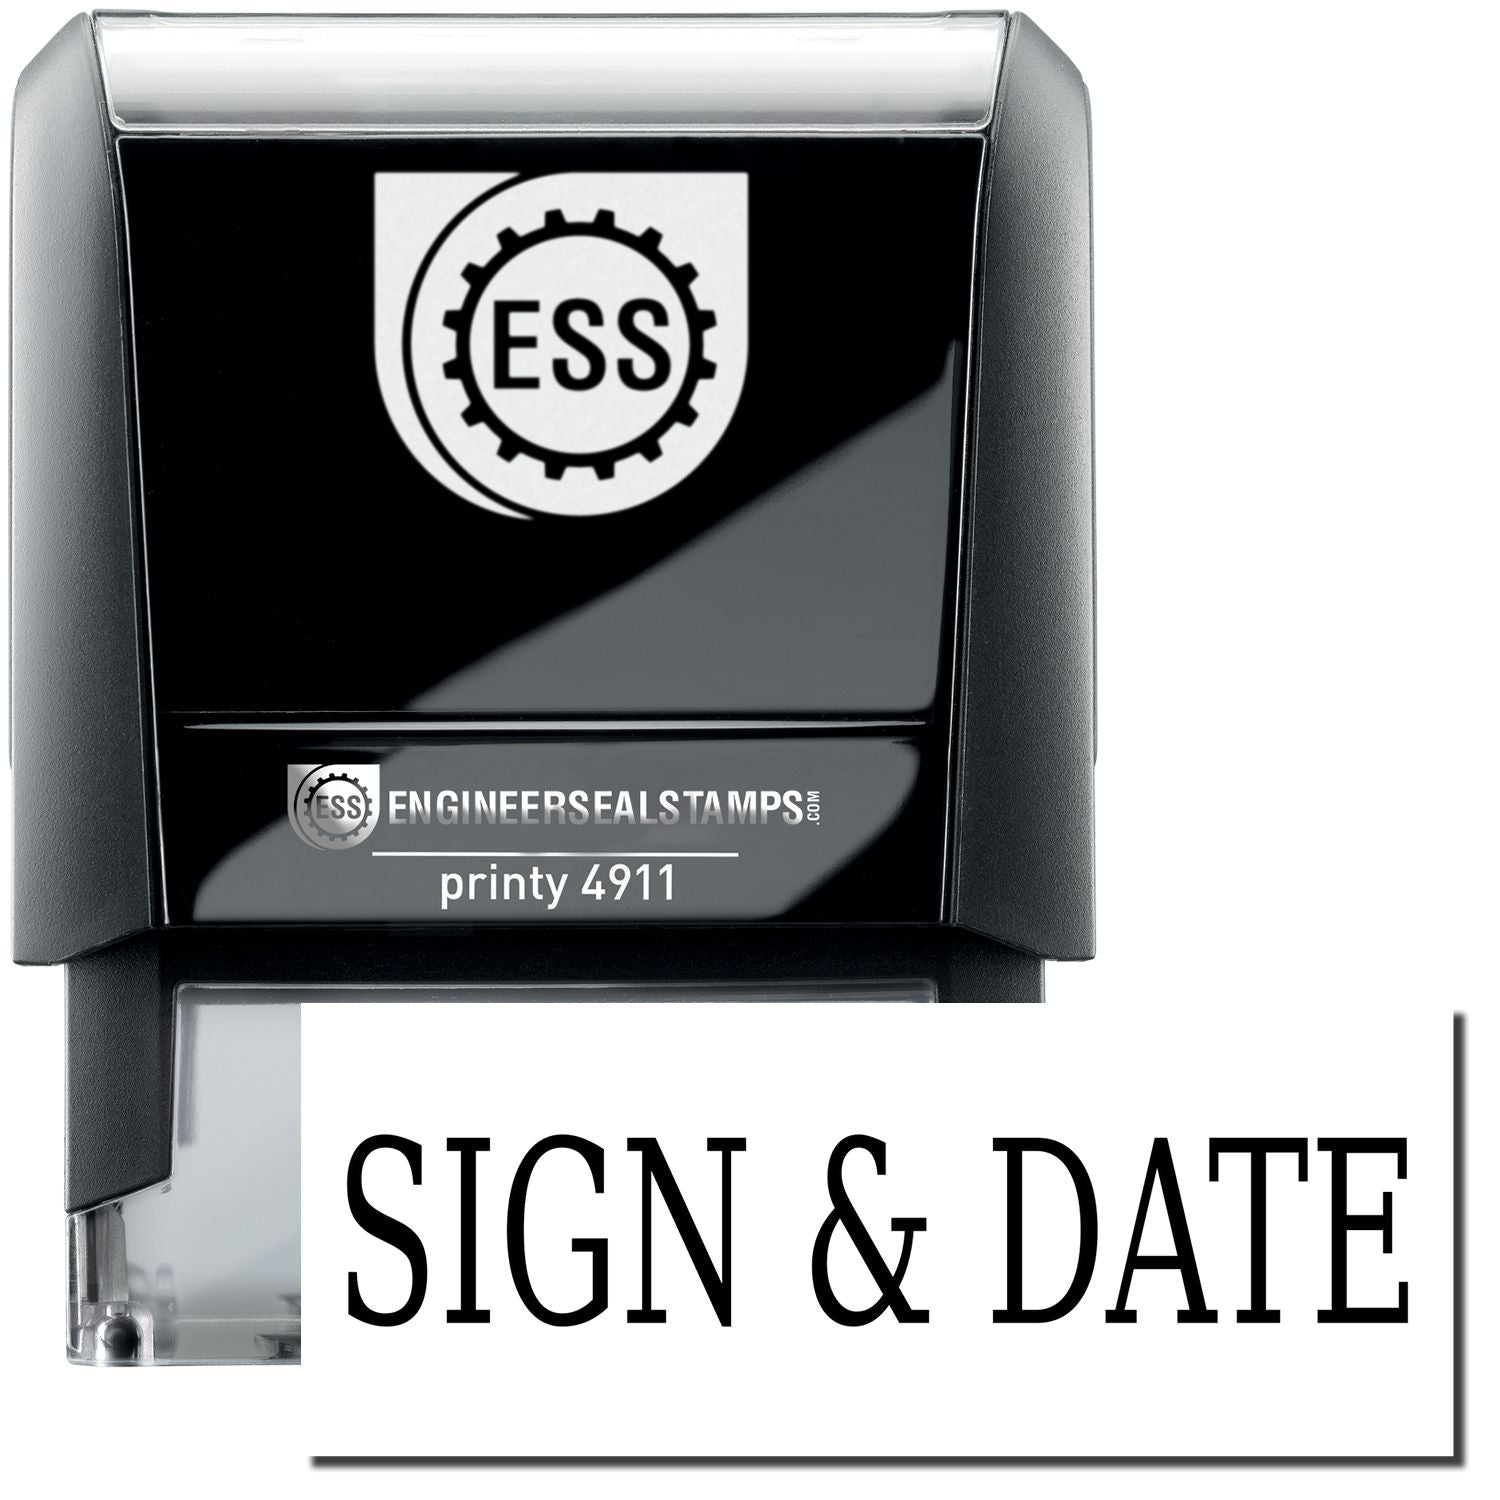 A self-inking stamp with a stamped image showing how the text "SIGN & DATE" is displayed after stamping.